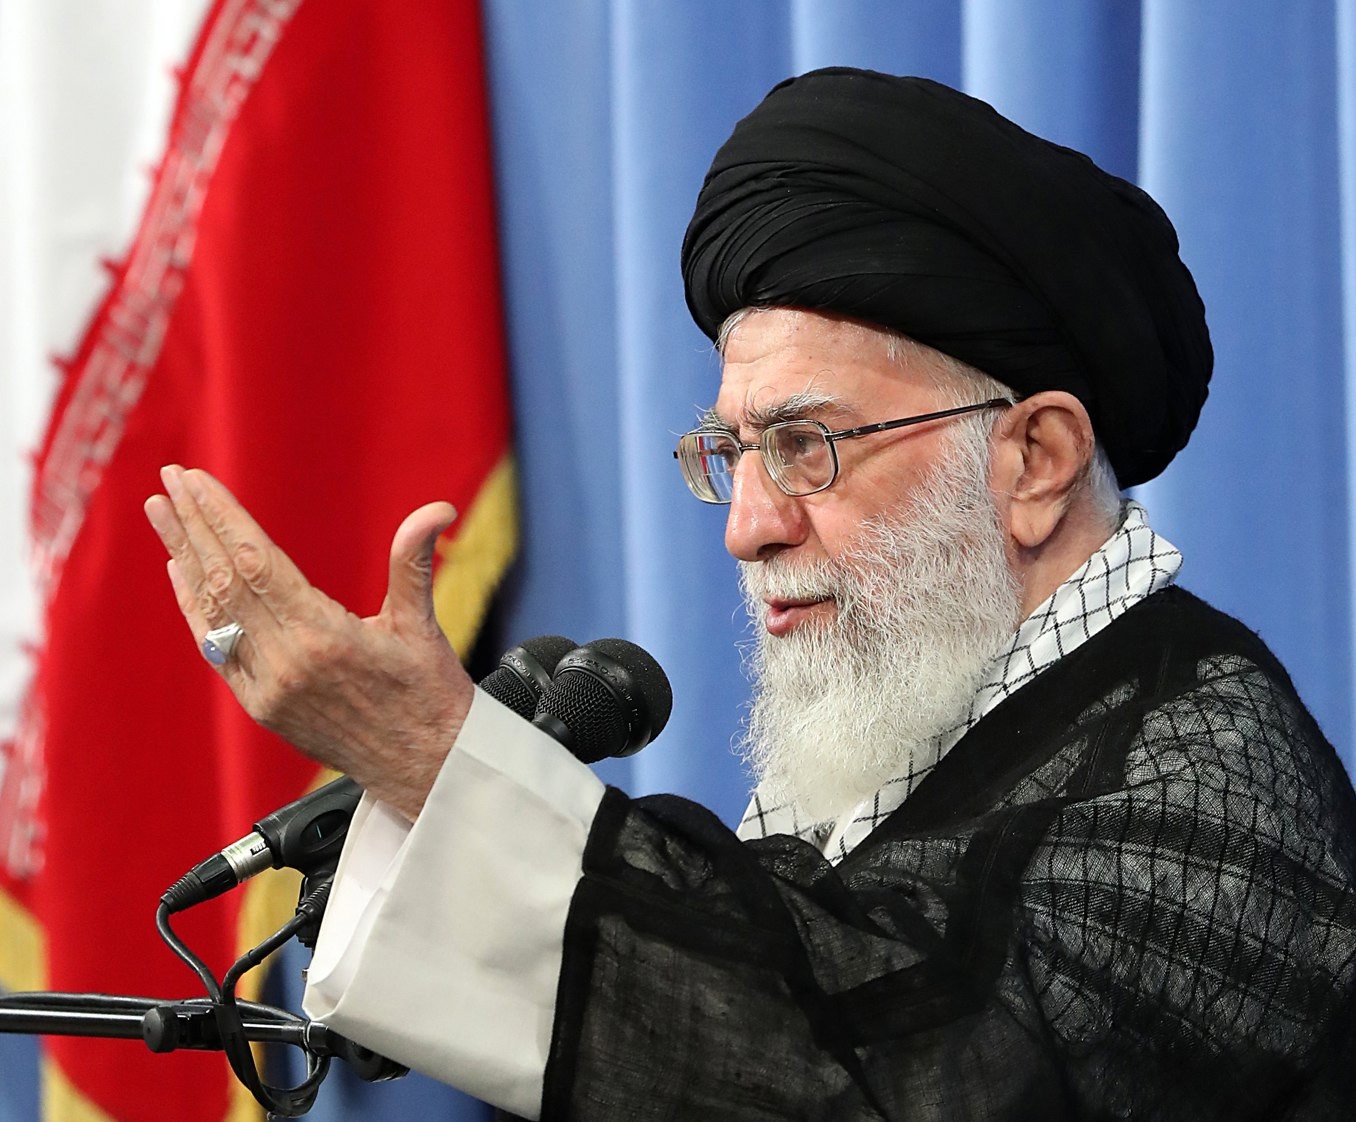 Iranian supreme leader Ayatollah Ali Khamenei speaks during a ceremony in Tehran in May. Khamenei has been adamant that Iran’s nuclear programme is not for building nuclear weapons, that it has the right to a peaceful nuclear programme and that Iran’s opposition to the United States did not change after the 2015 nuclear deal. Photo: EPA